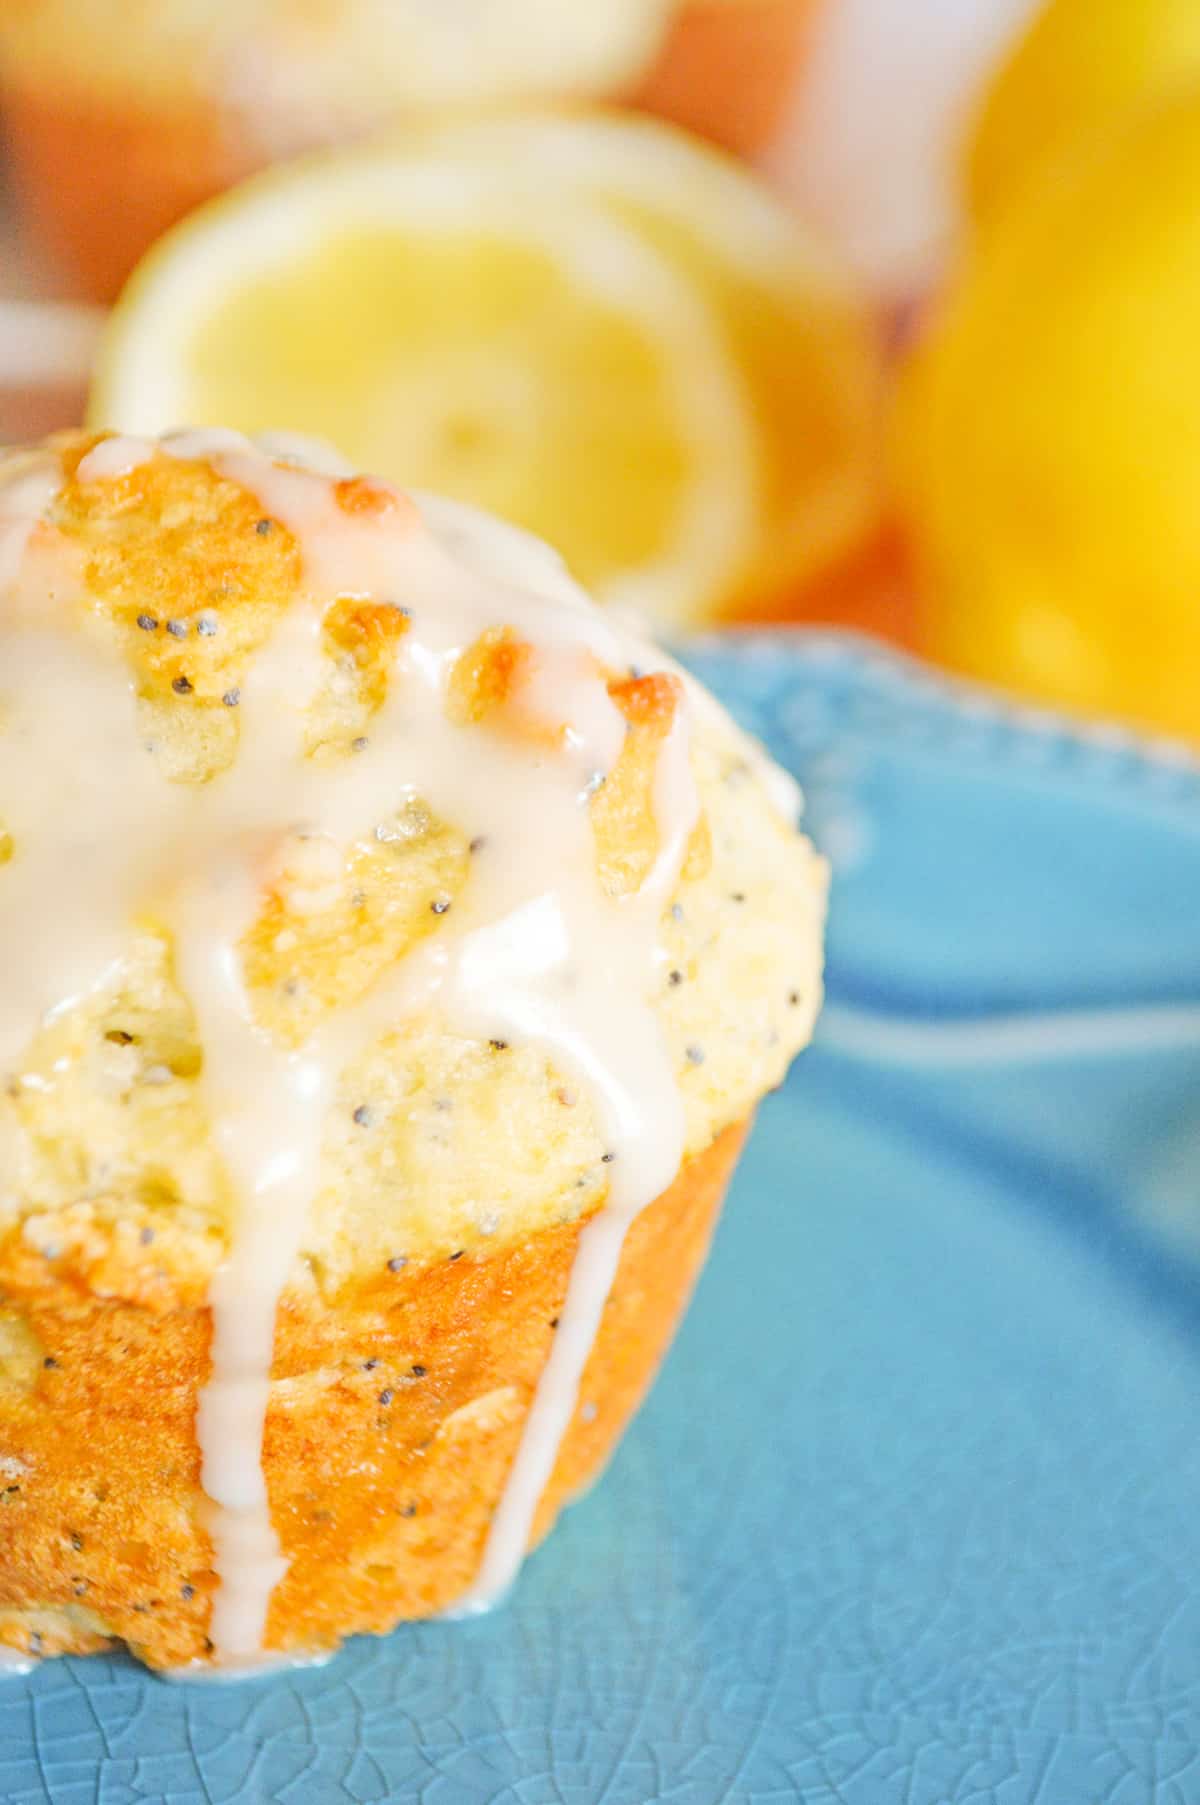 Lemon muffin with glaze and poppy seeds